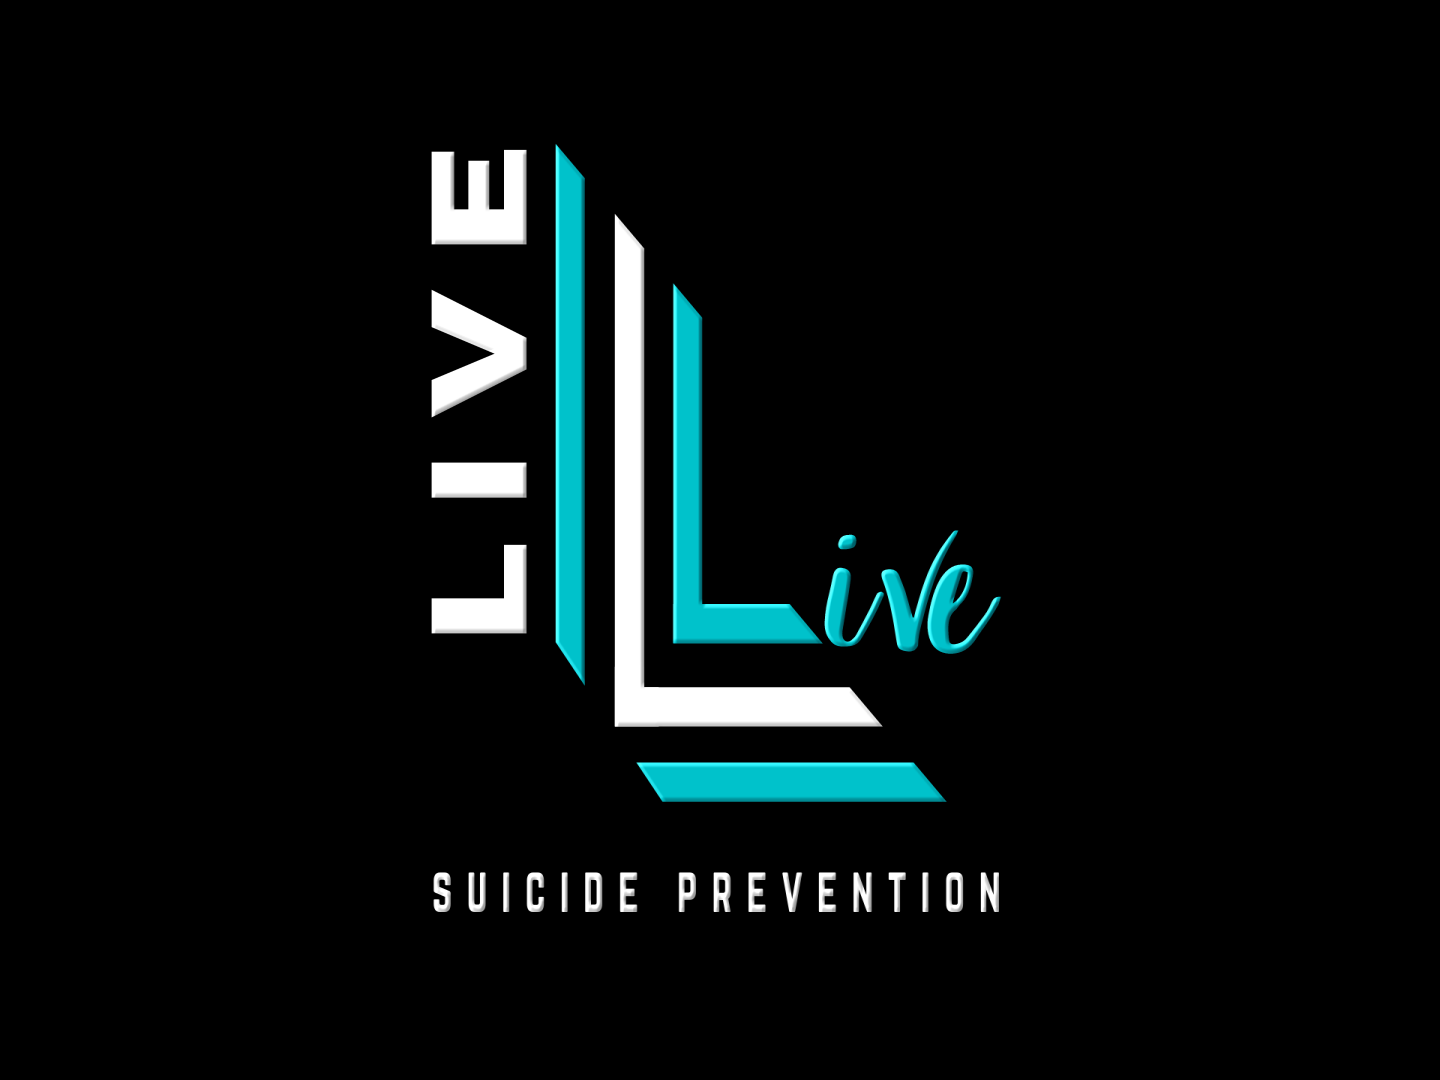 Get The Best Sponsorship Package For This Live Streamed Suicide Prevention Event